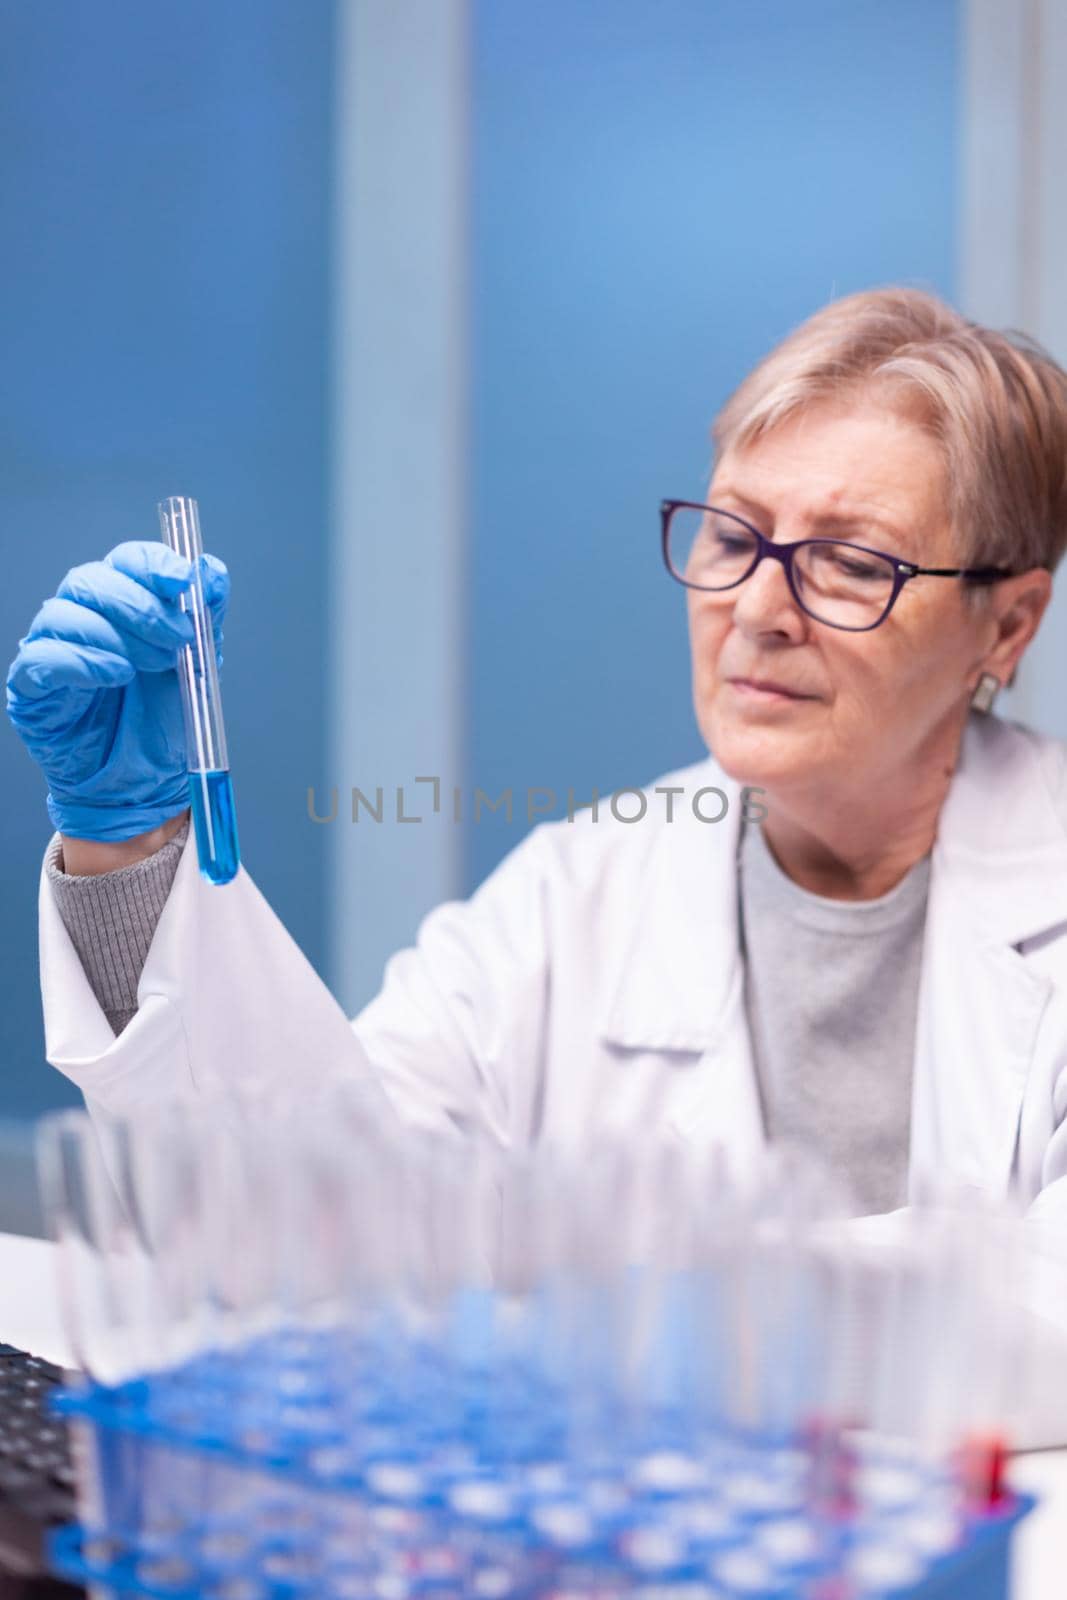 Senior doctor discovering genetic infection and analysing a test tube for medical expertise. Pharmaceutical scientist in research laboratory work with professional technology equipment for healdcare development